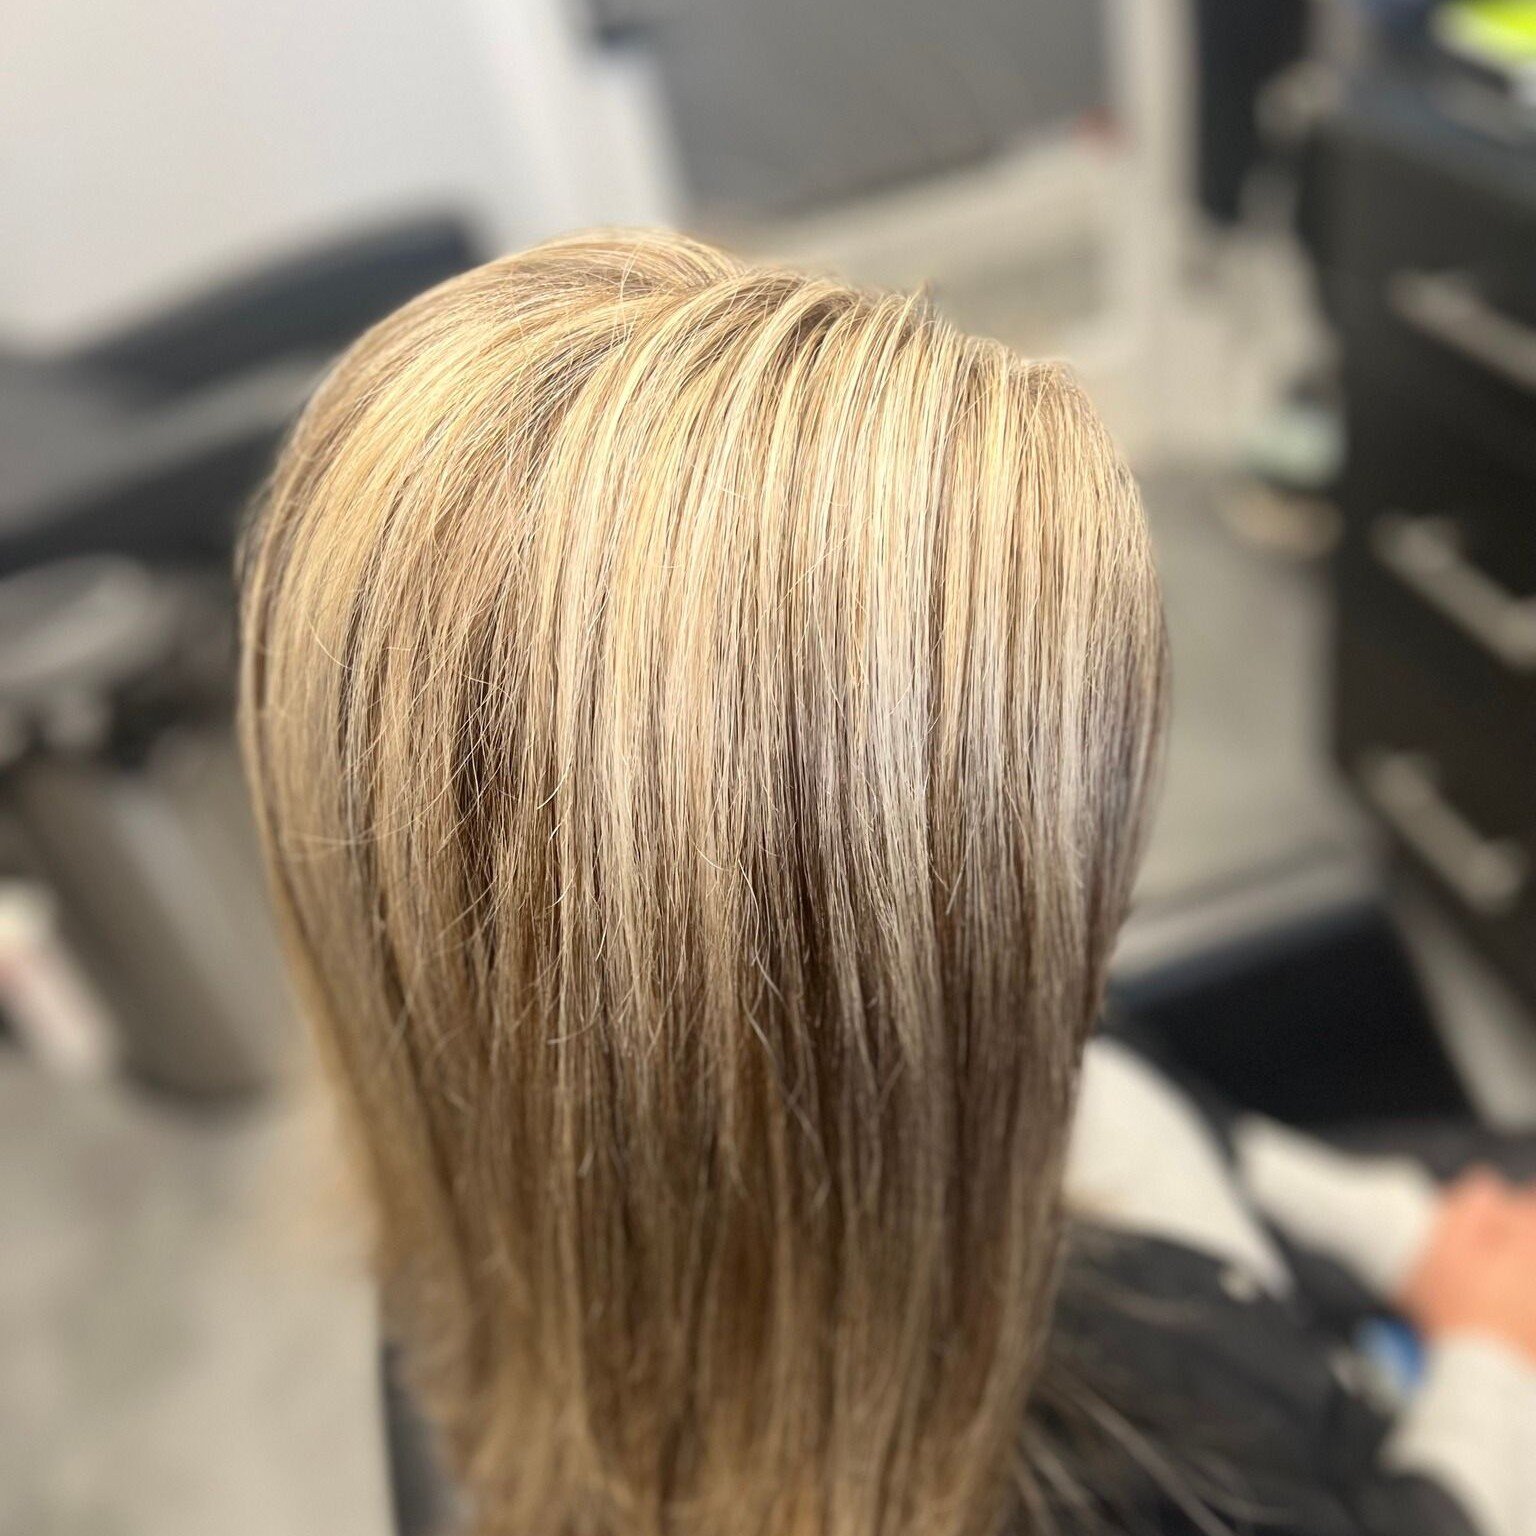 Highlights and lowlights to brighten up your hair!

 #naplesflorida #kevinmurphyproducts #kevinmurphysalon #napleshair #napleshaircolor #kevinmurphycolor #kevinmurphycolorme #napleshairsalon #kevinmurphy #napleshairstylist #kevinmurphyhair #naplesfl